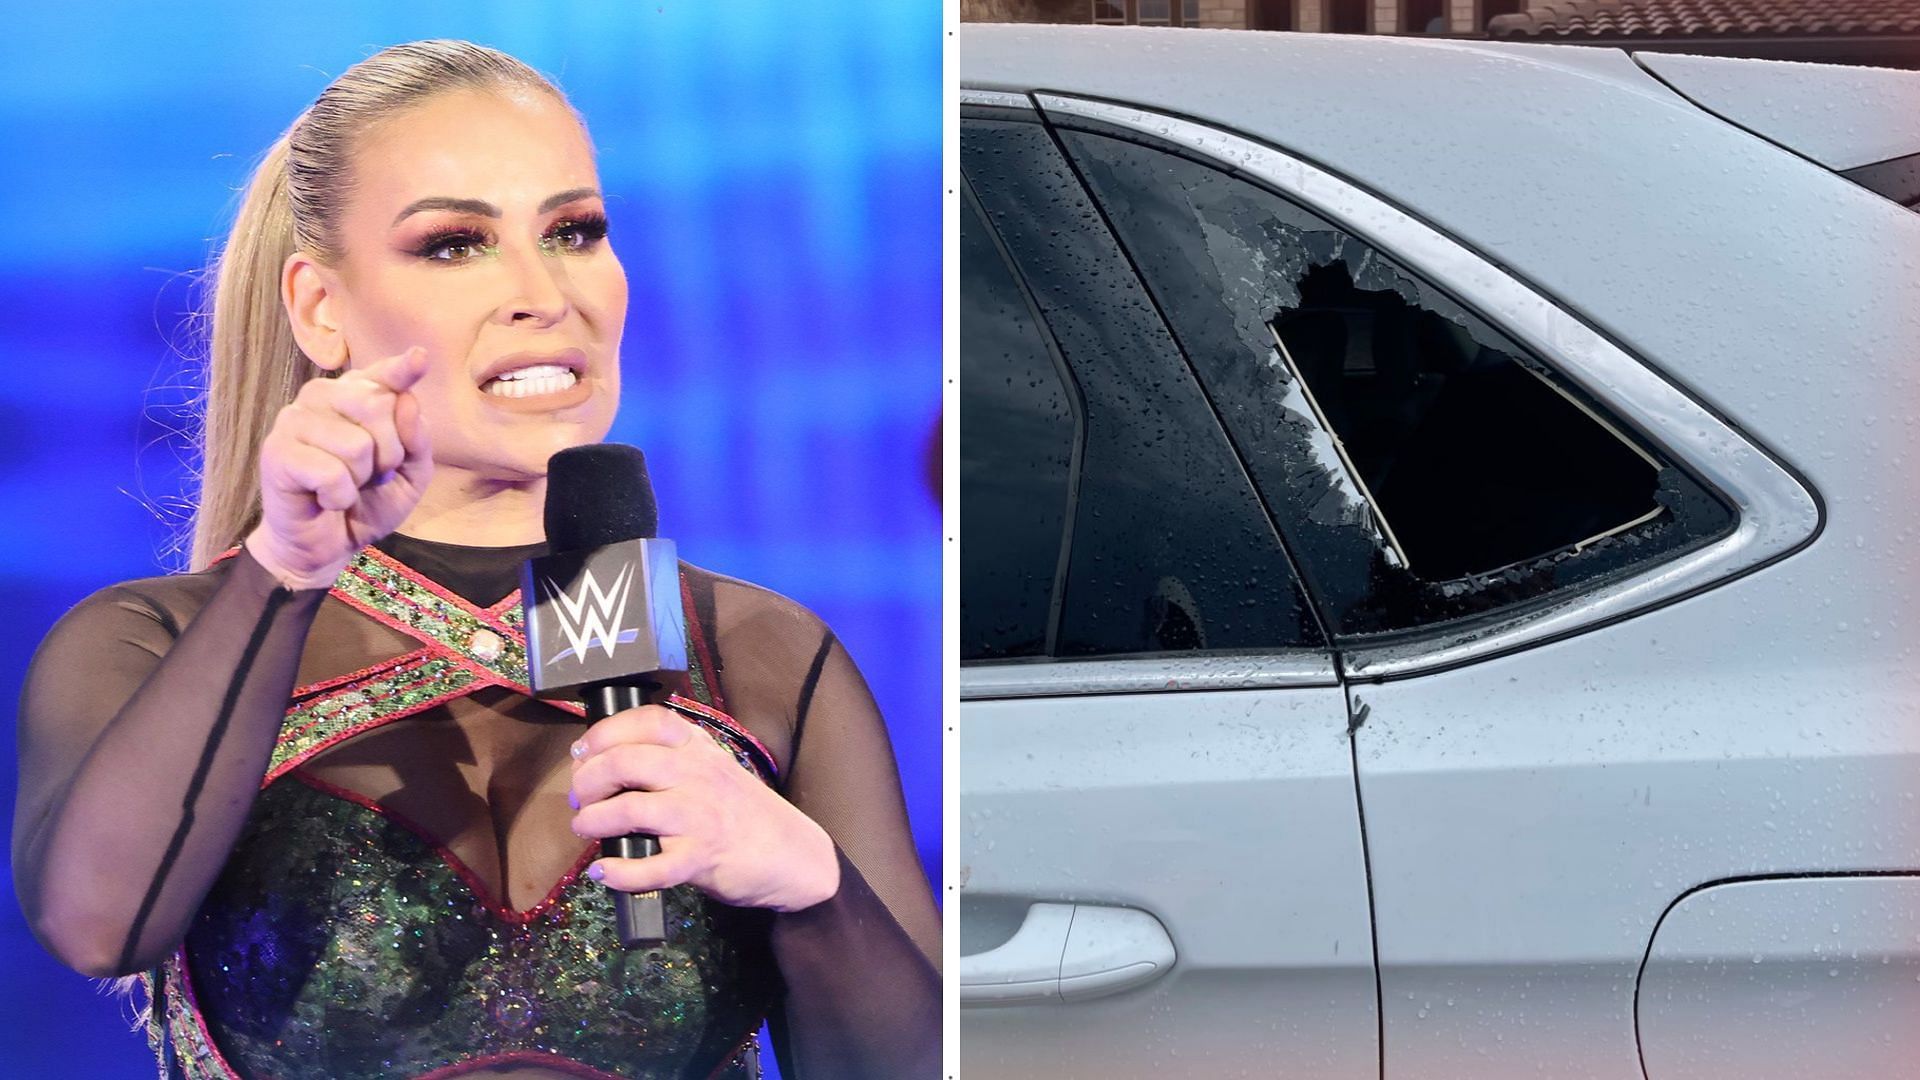 Natalya shatters the window of her own car.